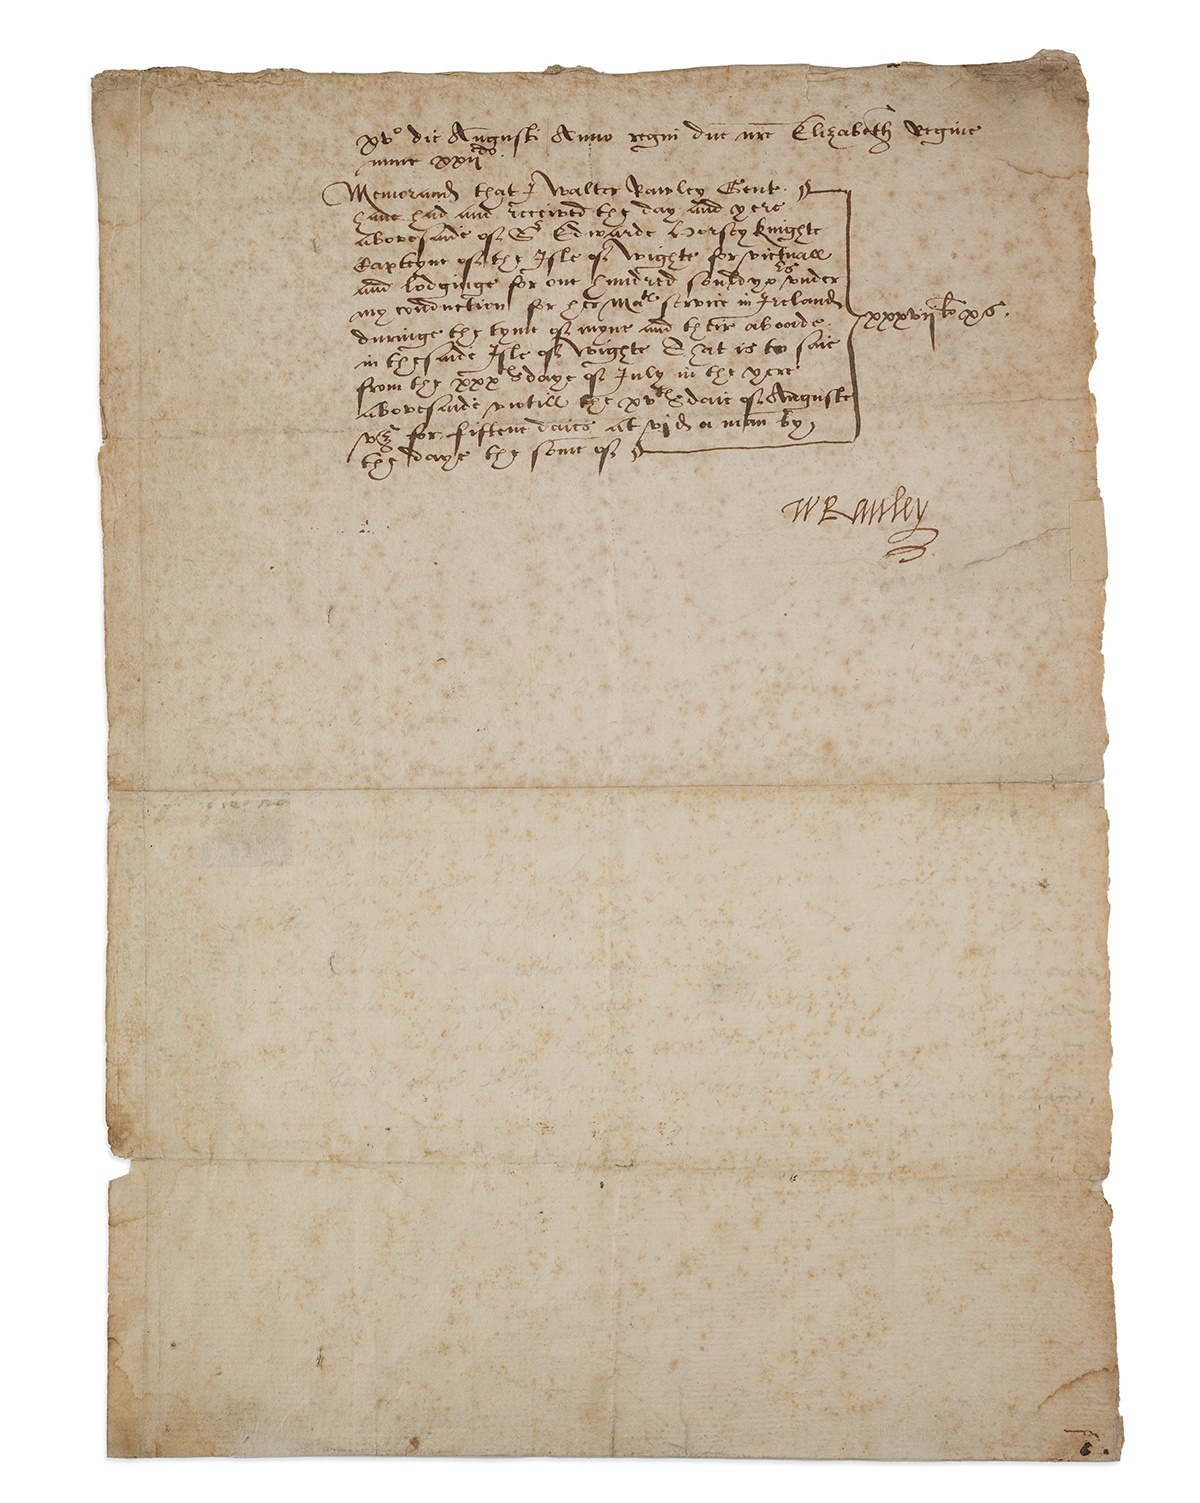 RALEIGH, SIR WALTER (1554-1618) DOCUMENT SIGNED, ISLE OF WIGHT, 15TH AUGUST 1580